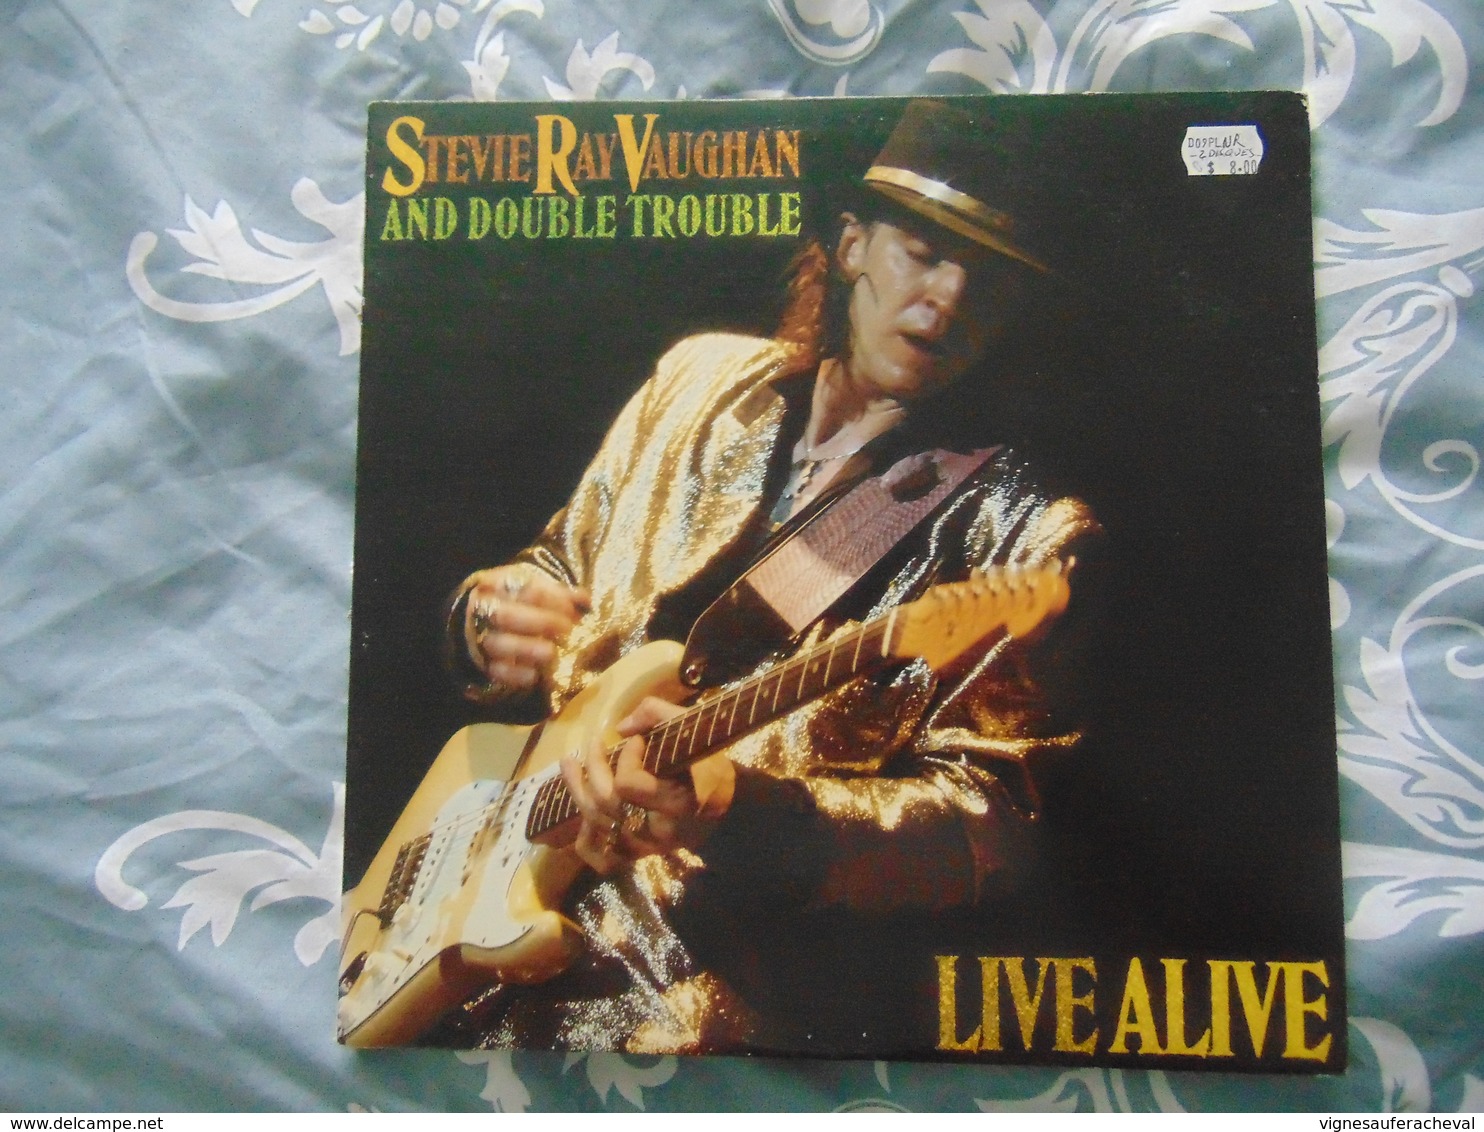 Stevie Ray Vaughan- Live Alive (2LP) - Blues